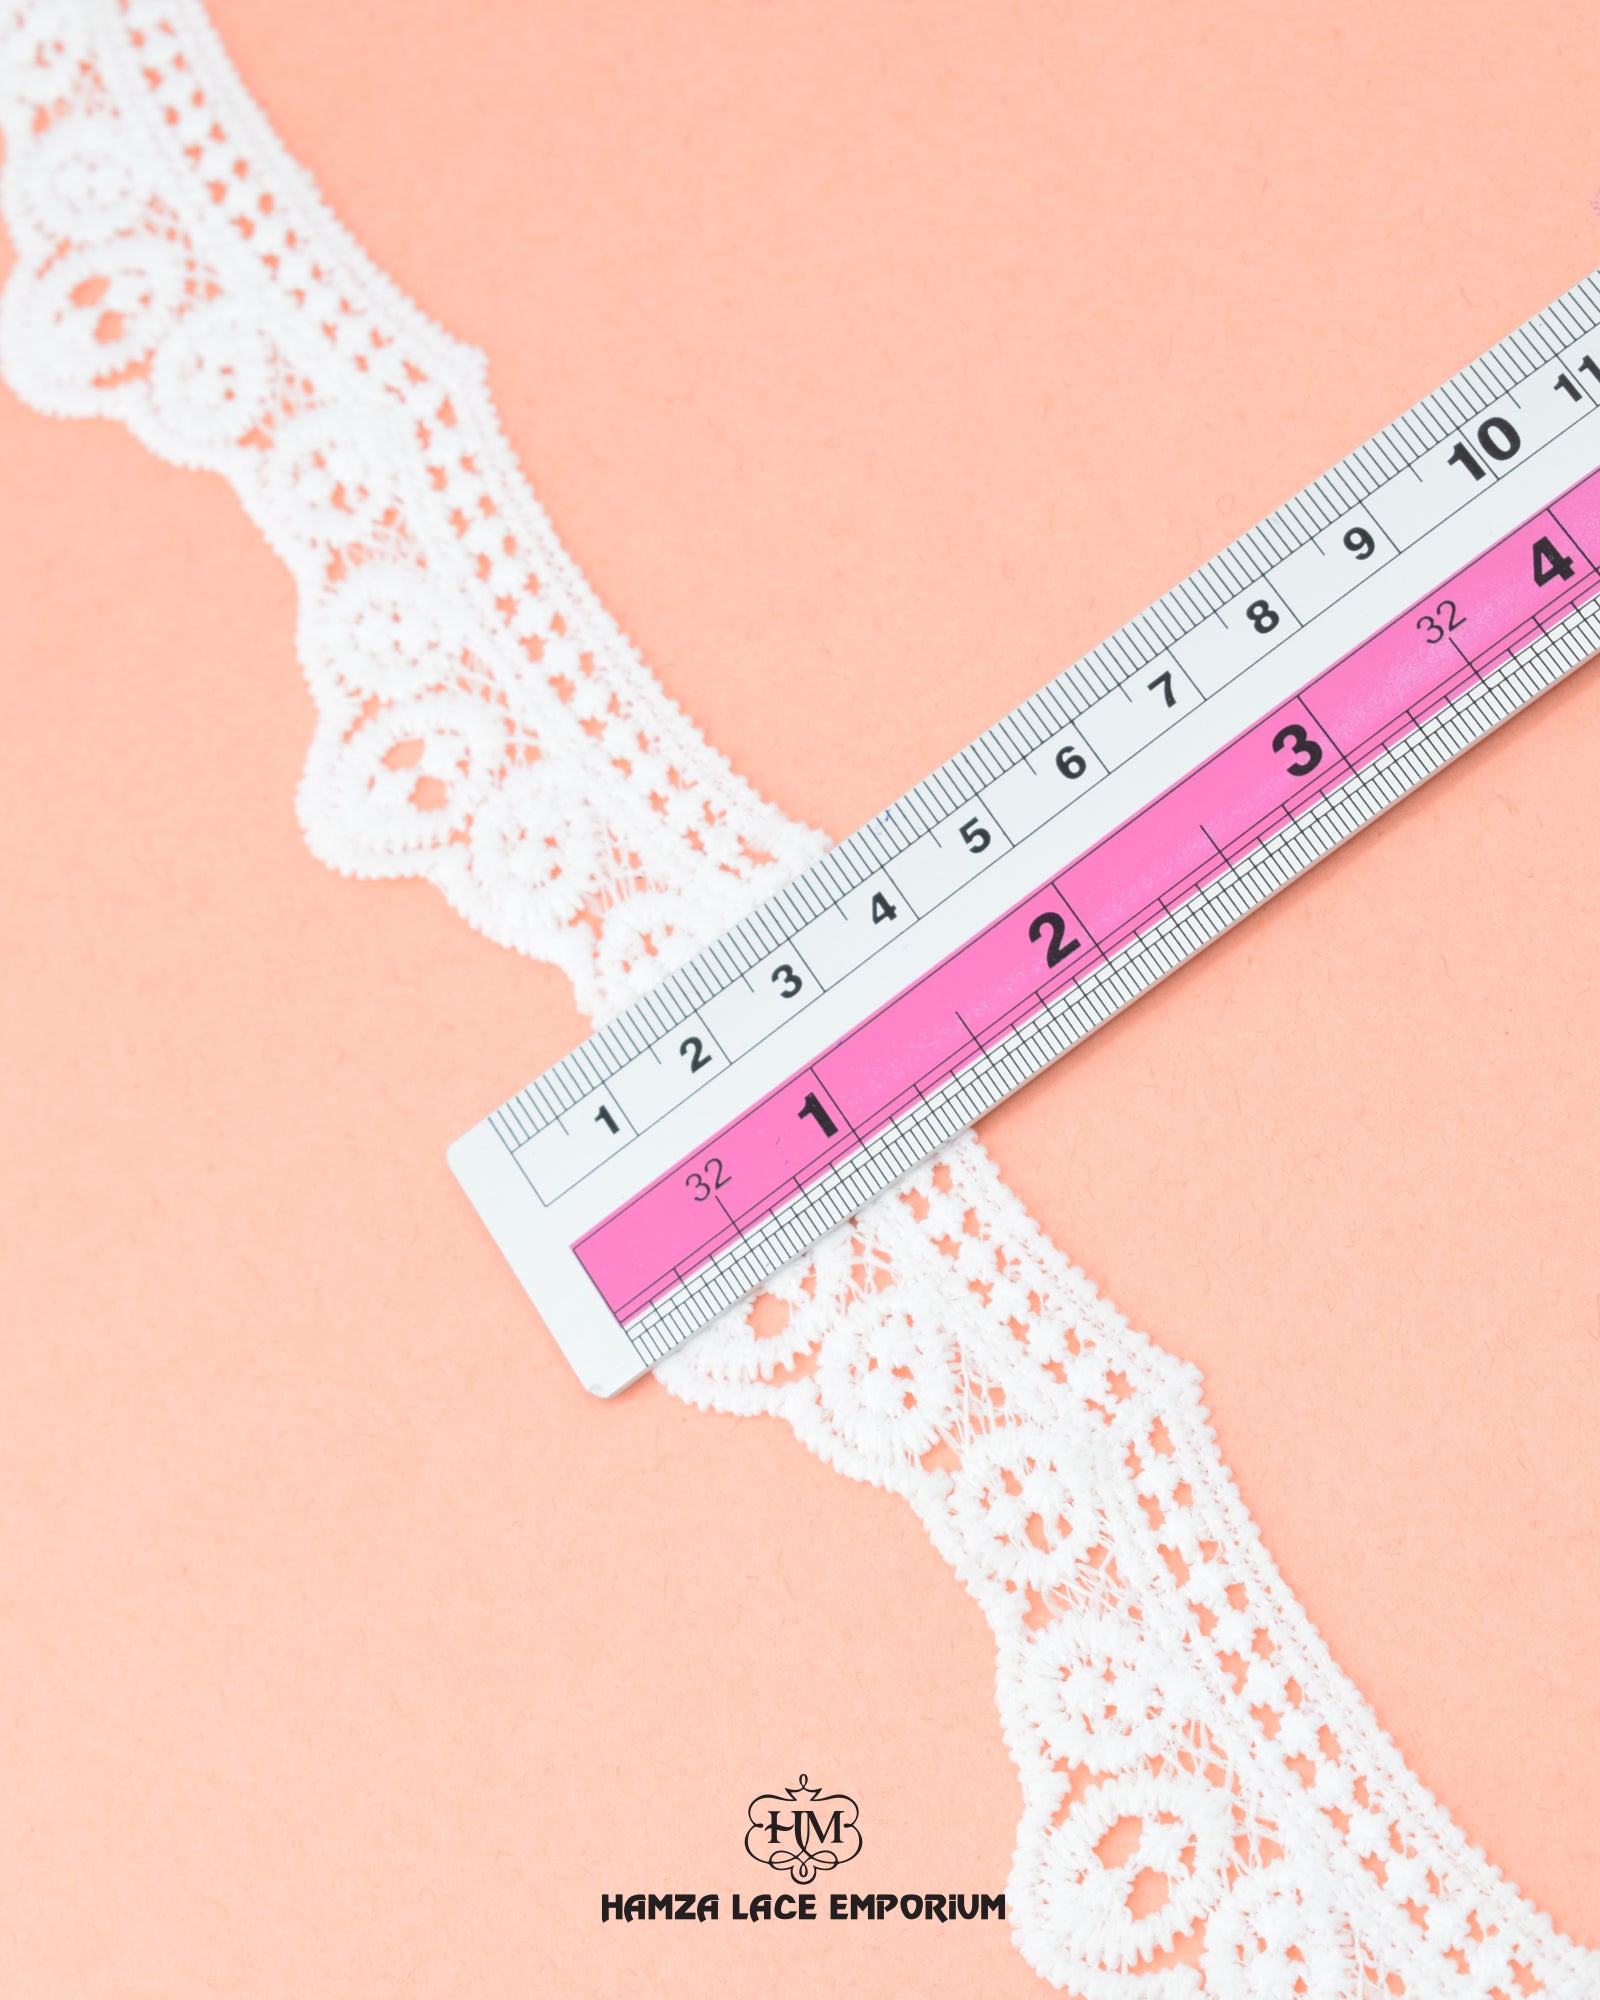 Size of the 'Edging Lace 23190' is shown as '1.5' inches with the help of a ruler